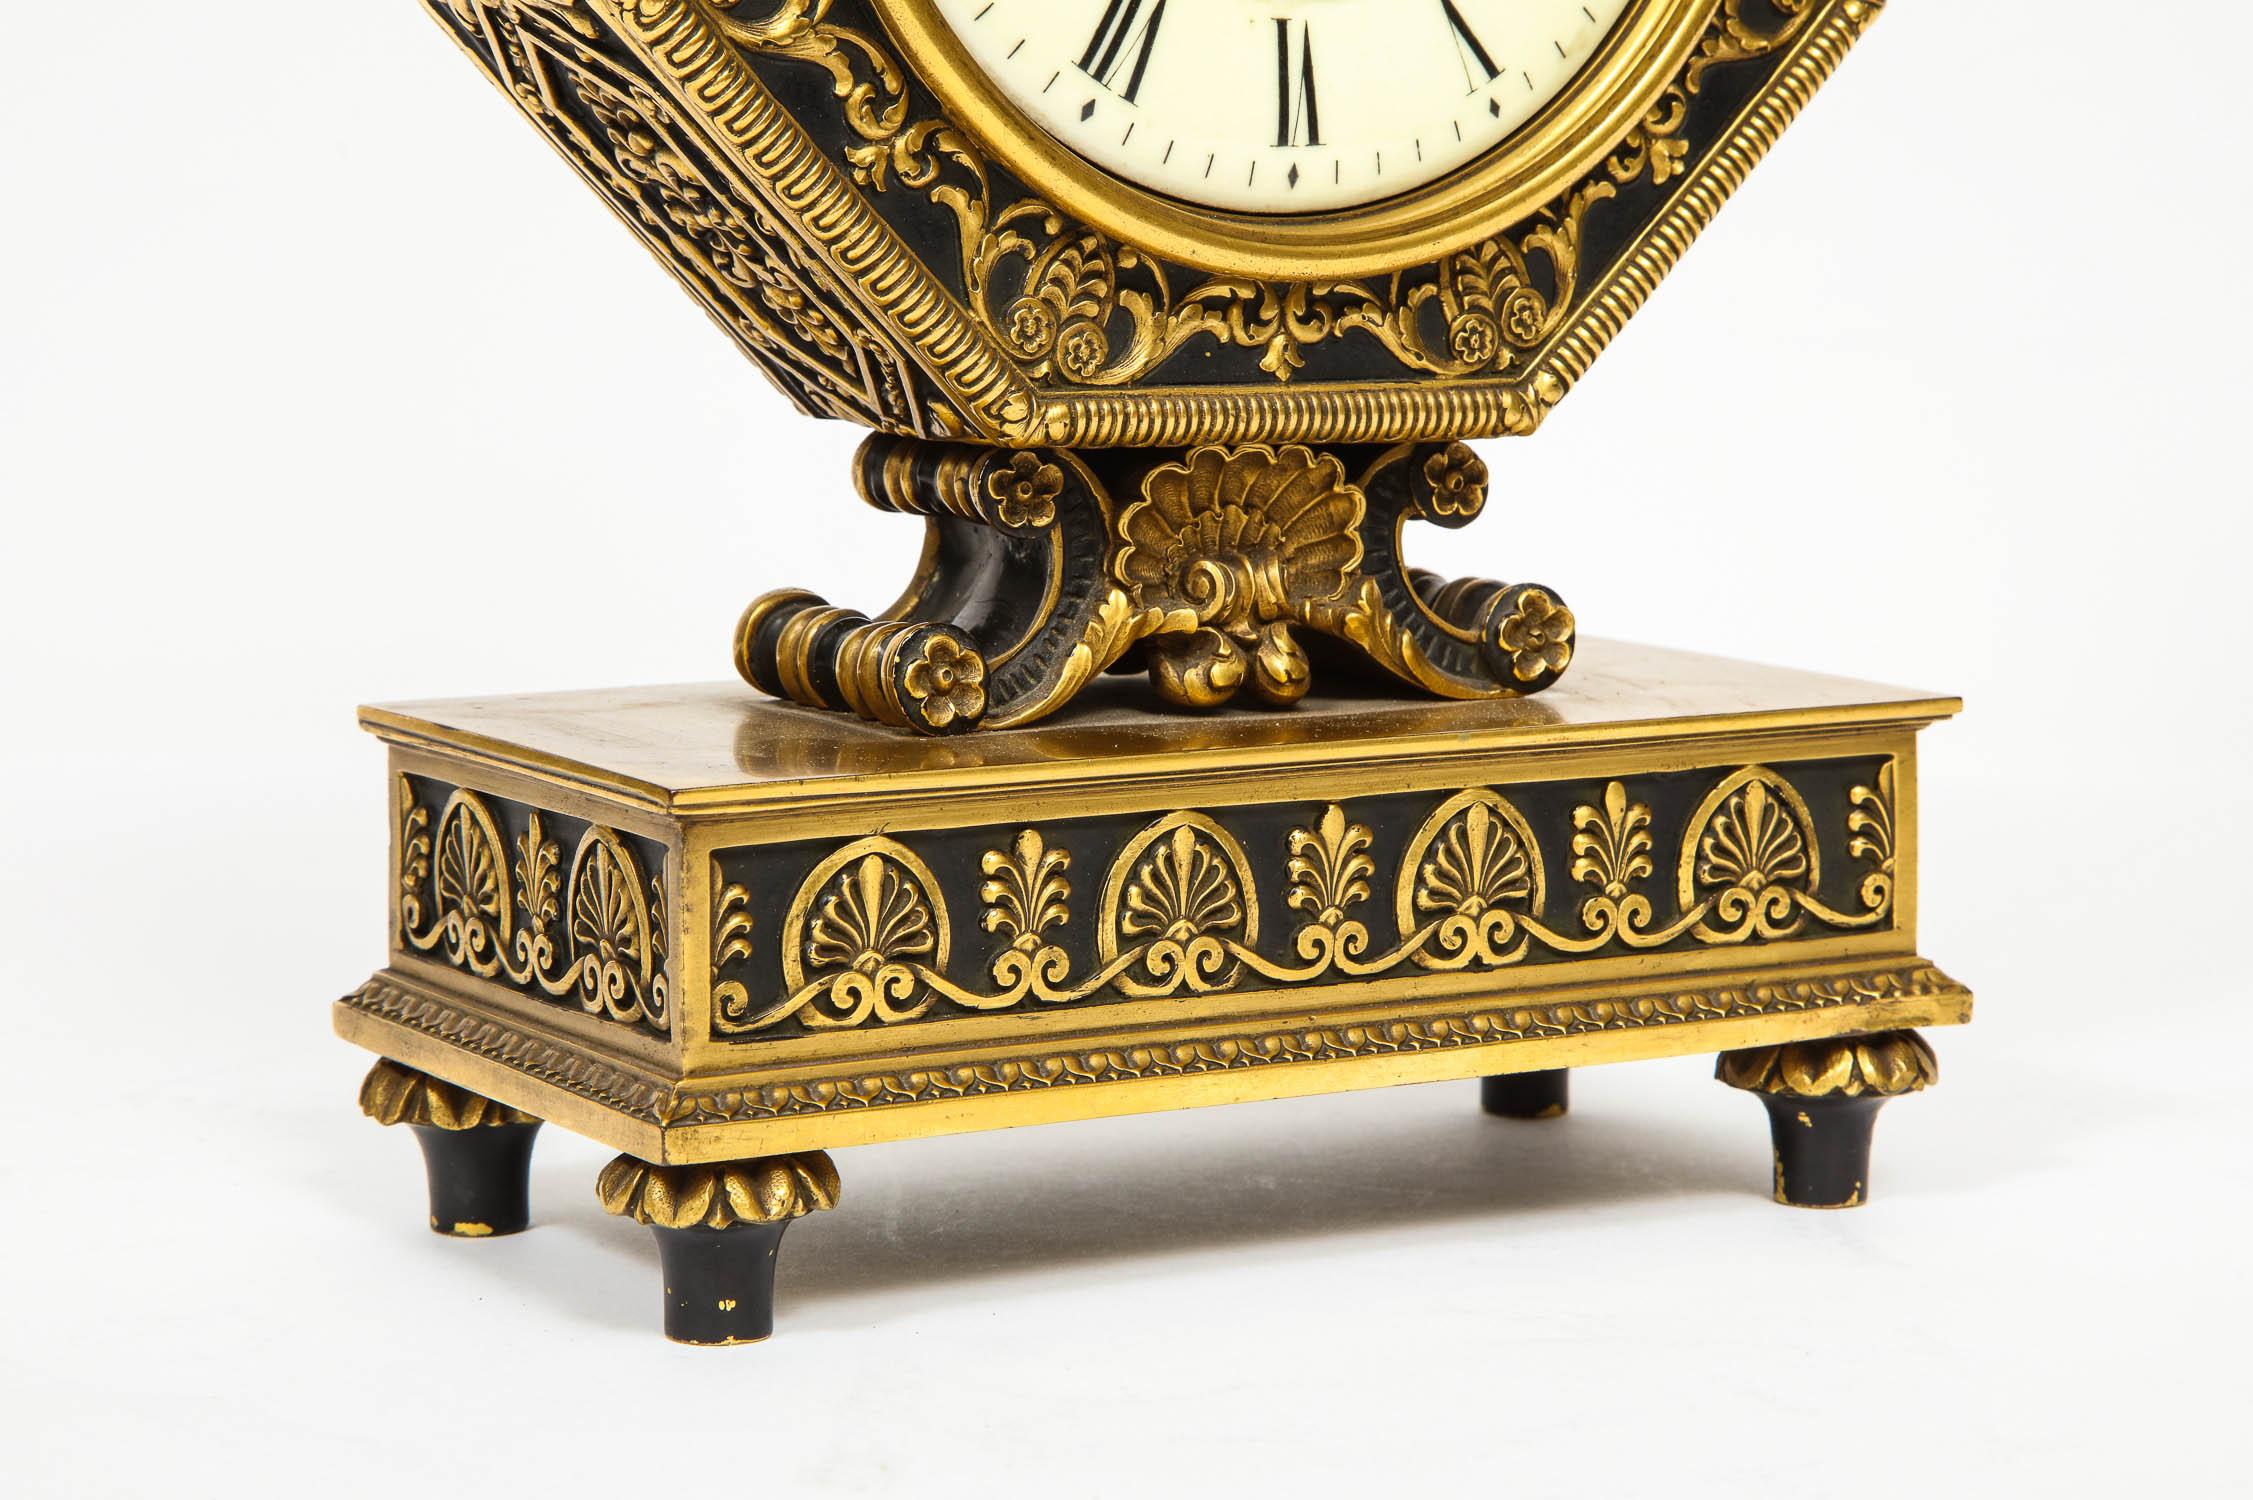 E.F. Caldwell & Co., an American Gilt and Patinated Bronze Clock 3